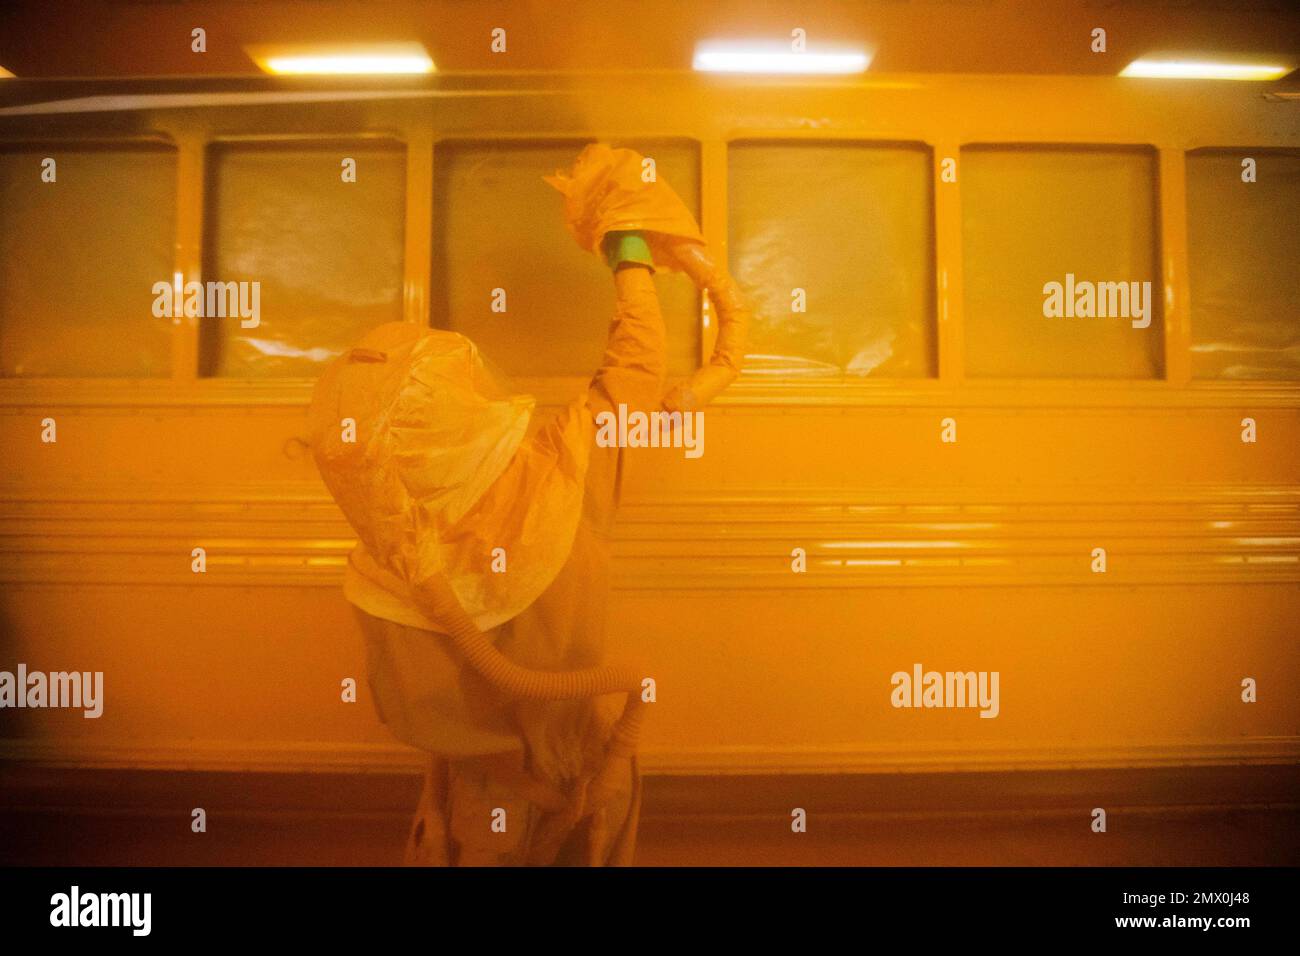 https://c8.alamy.com/comp/2MX0J48/for-use-as-desired-in-this-sept-18-2015-photo-a-worker-paints-a-school-bus-on-the-assembly-line-at-blue-bird-corporations-manufacturing-facility-in-fort-valley-ga-blue-bird-corporation-one-of-the-nations-leading-manufacturer-of-school-buses-employees-about-1600-workers-and-has-sold-more-than-550000-buses-since-its-formation-in-1927-ap-photodavid-goldman-2MX0J48.jpg